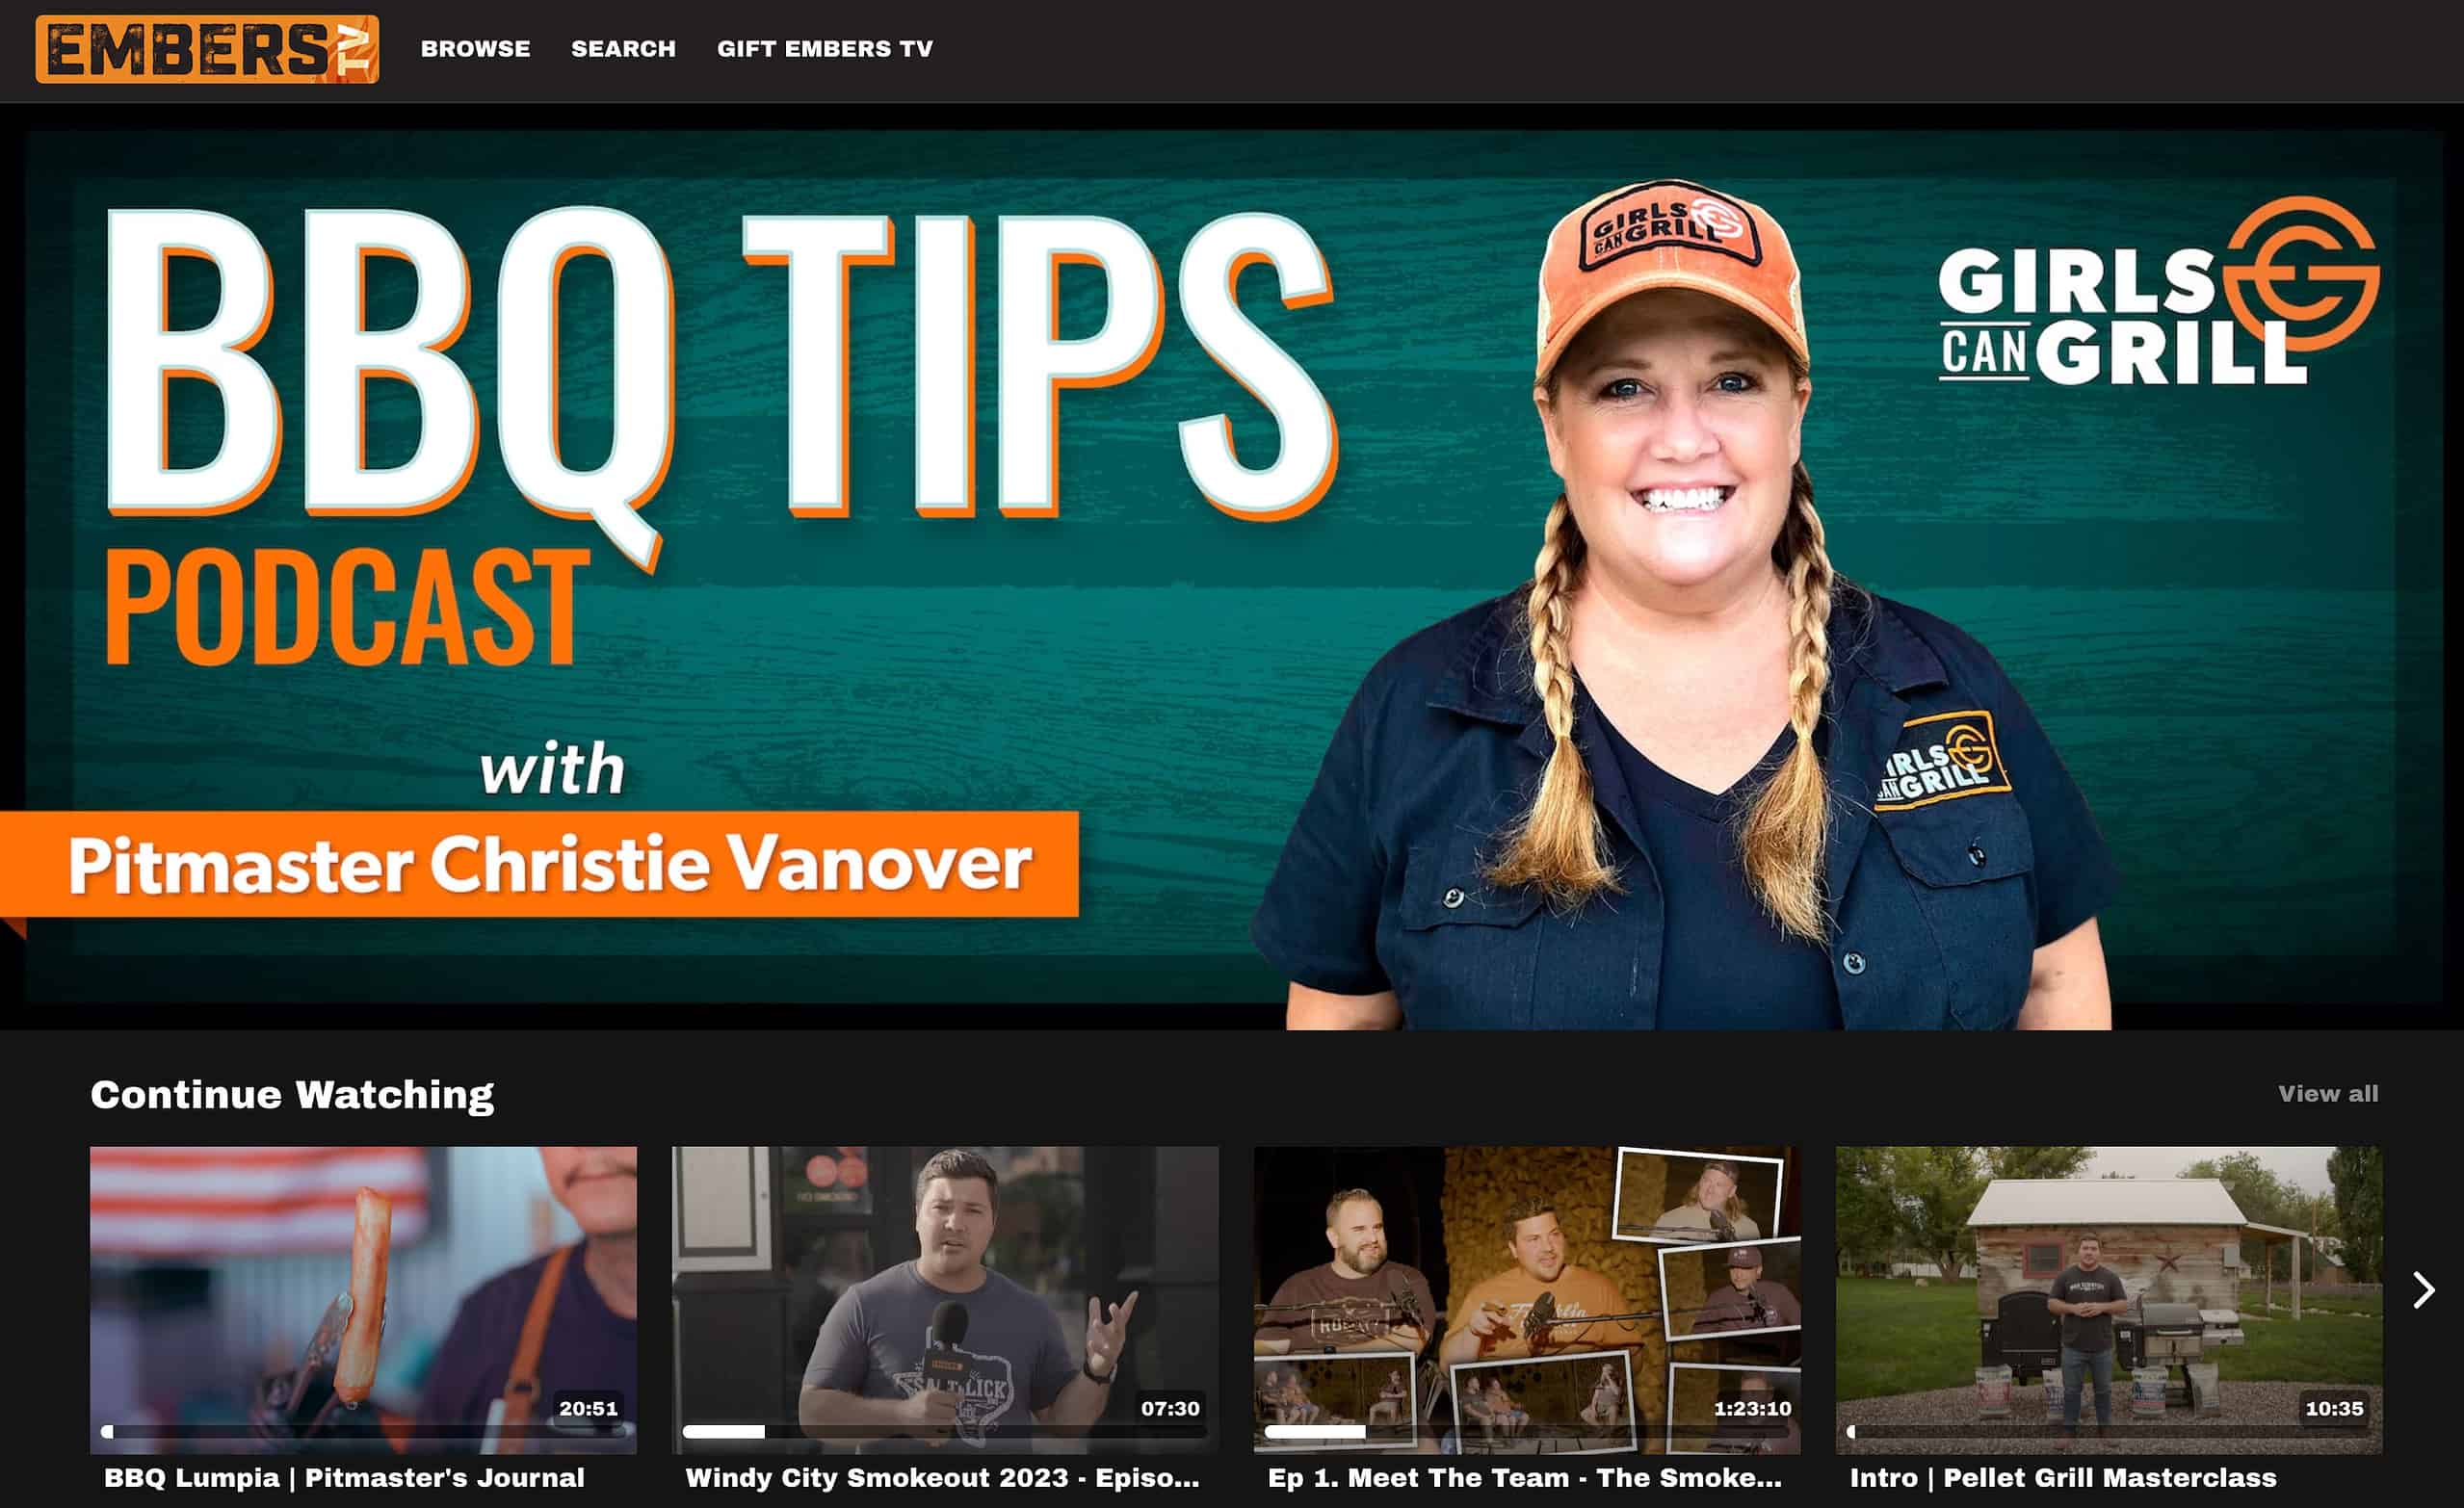 BBQ Tips Podcast with Christie Vanover on Embers TV. 